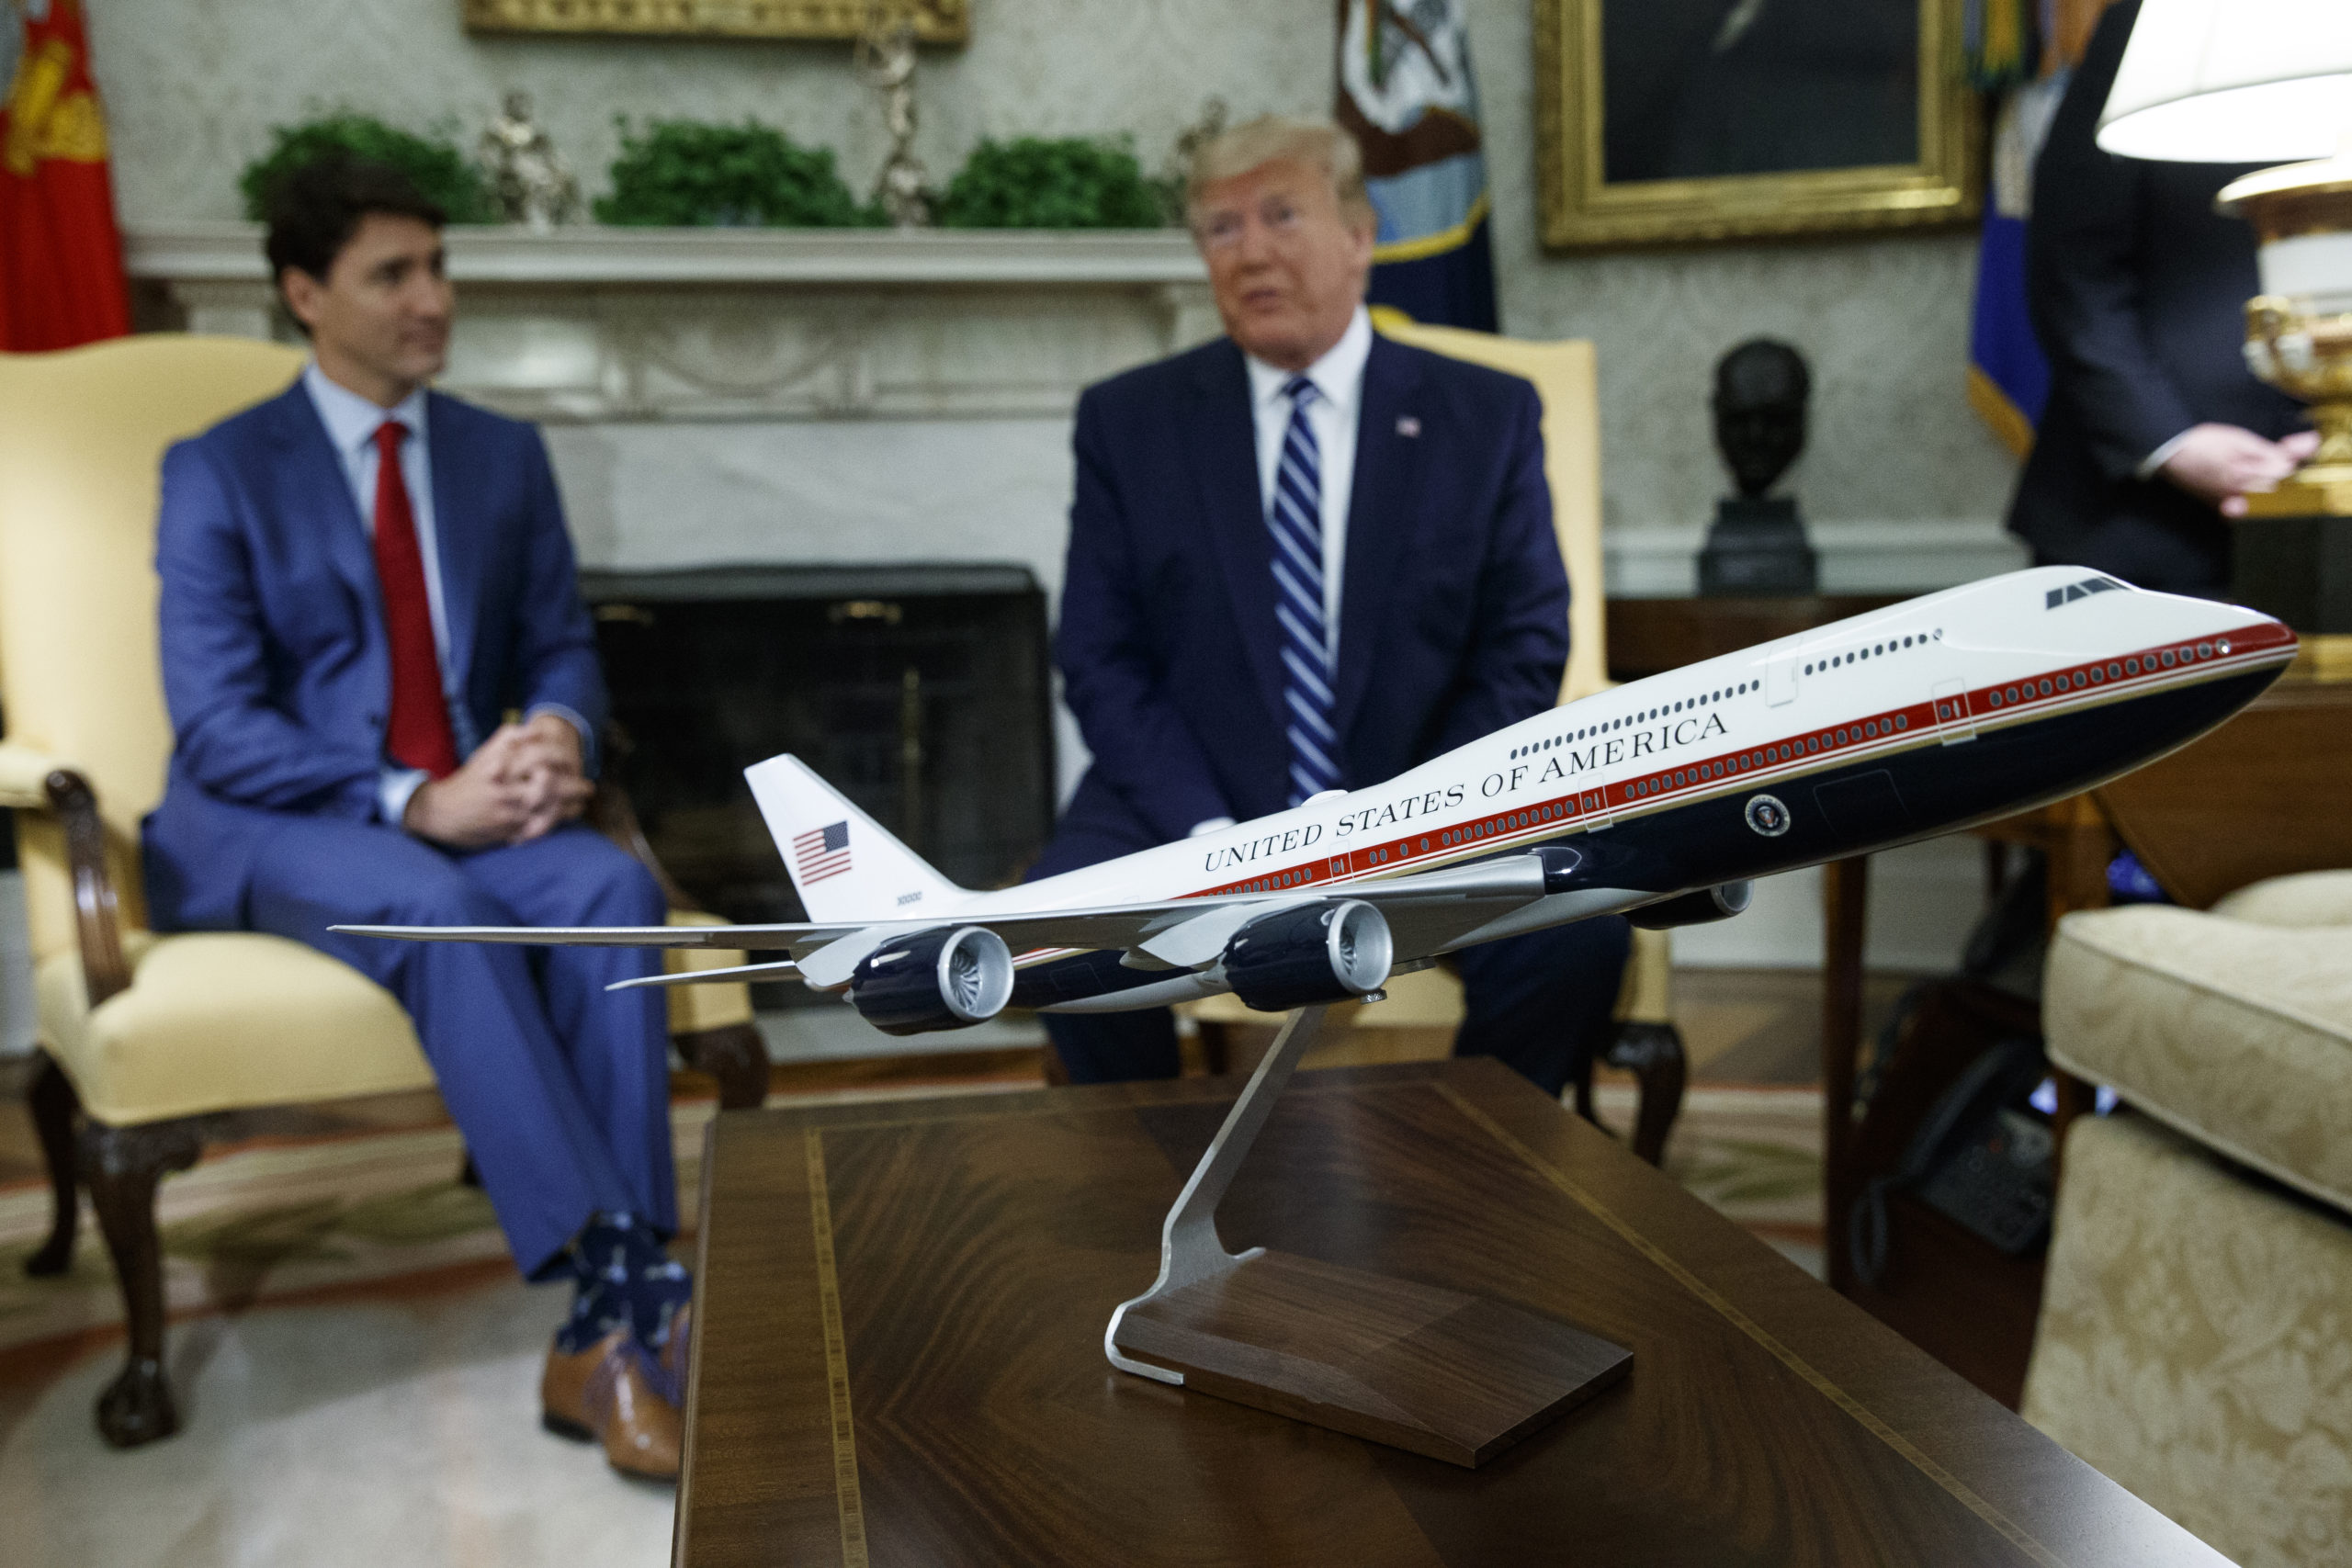 A model of the new Air Force One design sits on a table during a meeting between President Donald Trump and Canadian Prime Minister Justin Trudeau in the Oval Office of the White House, in this file photo from June 20, 2019. President Joe Biden's administration has scrapped former President Trump's red, white and blue design for the new generation of presidential aircraft after an Air Force review suggested it would raise costs and delay the delivery of the new jets.